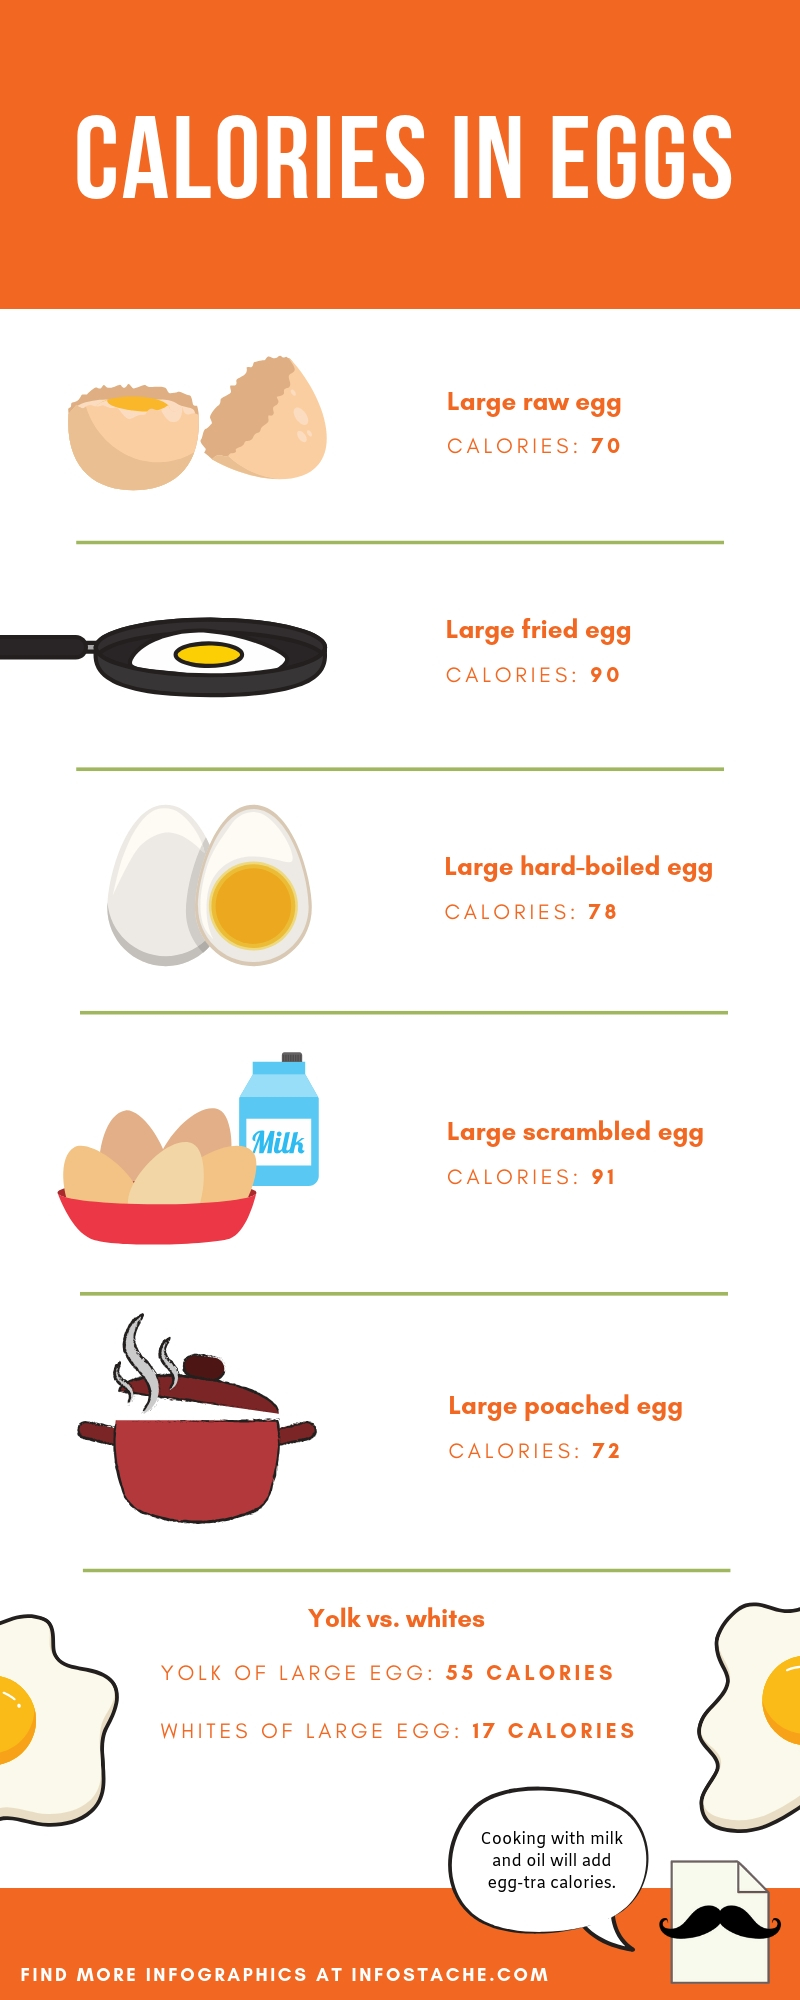 Calories in Eggs - Infographic